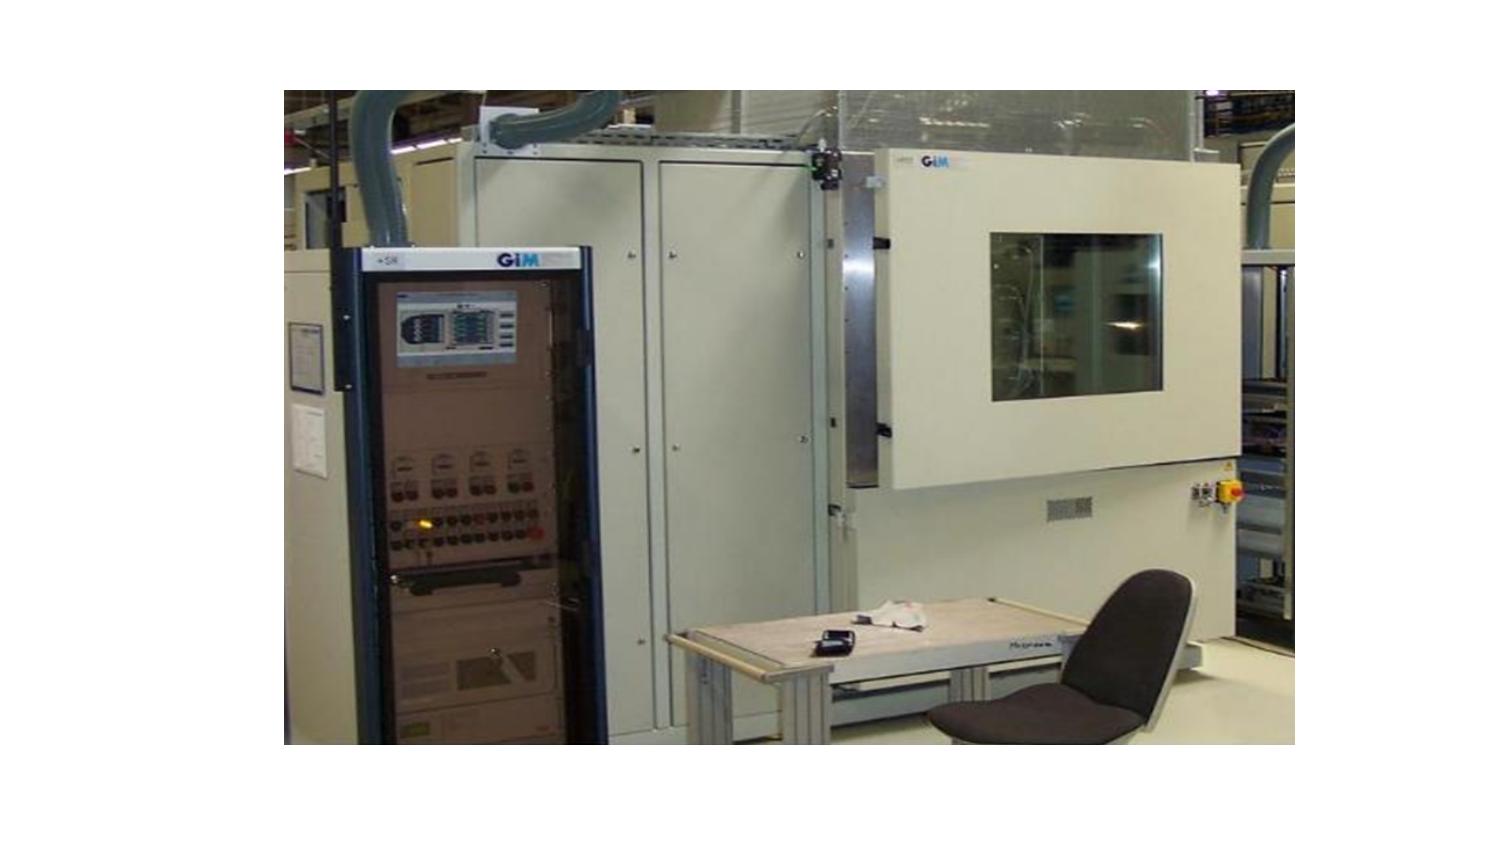 climatic-chamber-joint-boots-test-bench-GIM4-1